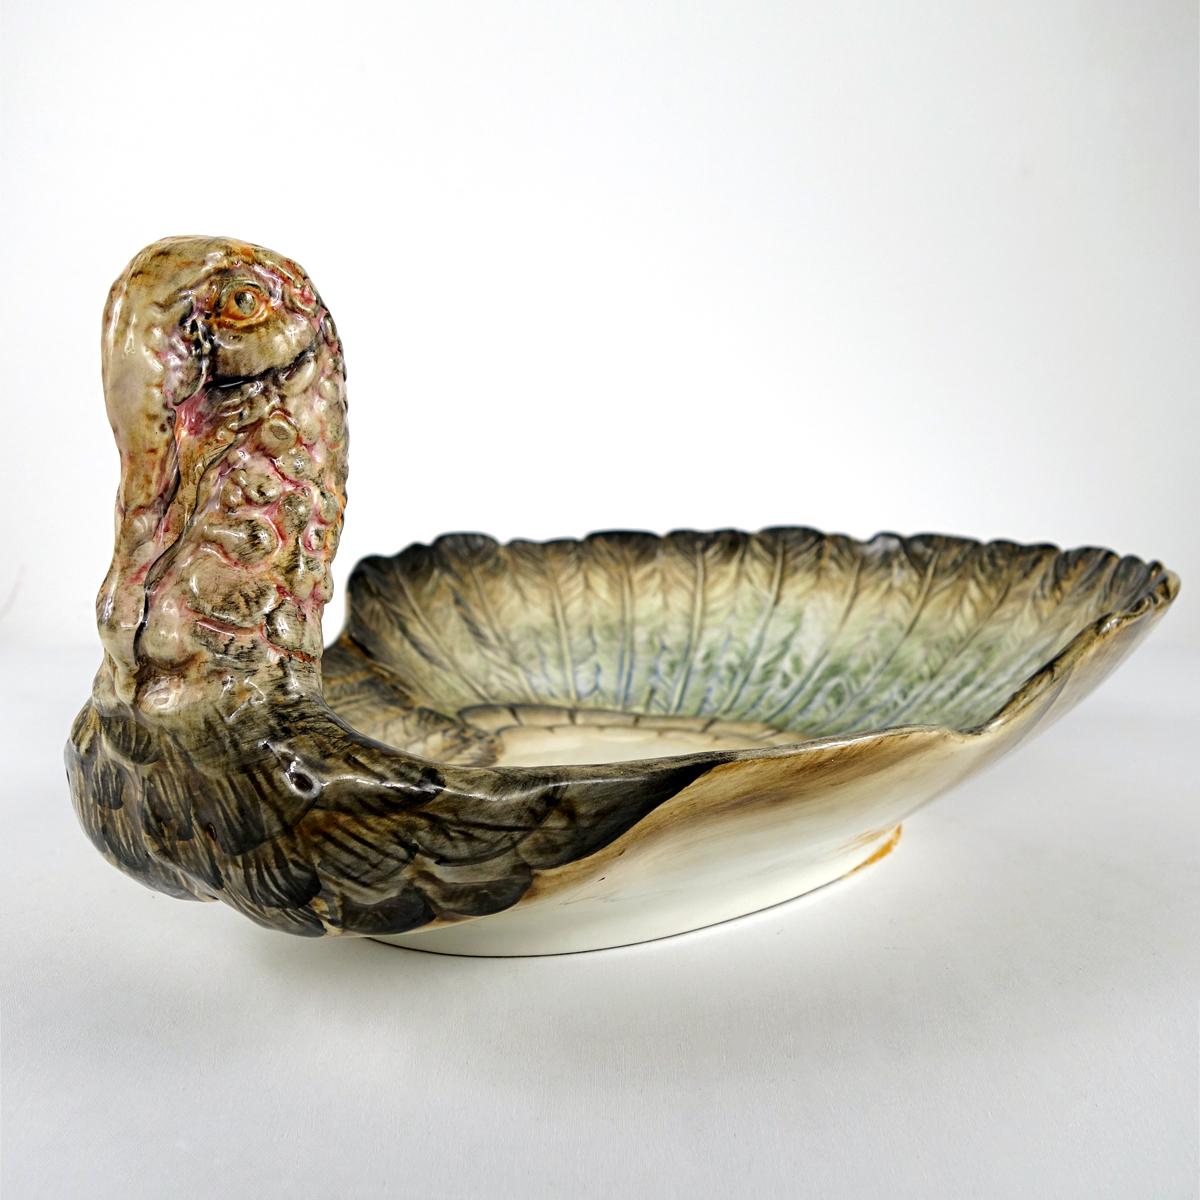 Gorgeous ceramic platter to serve turkey in great Italian style. 
It is decorated by hand (